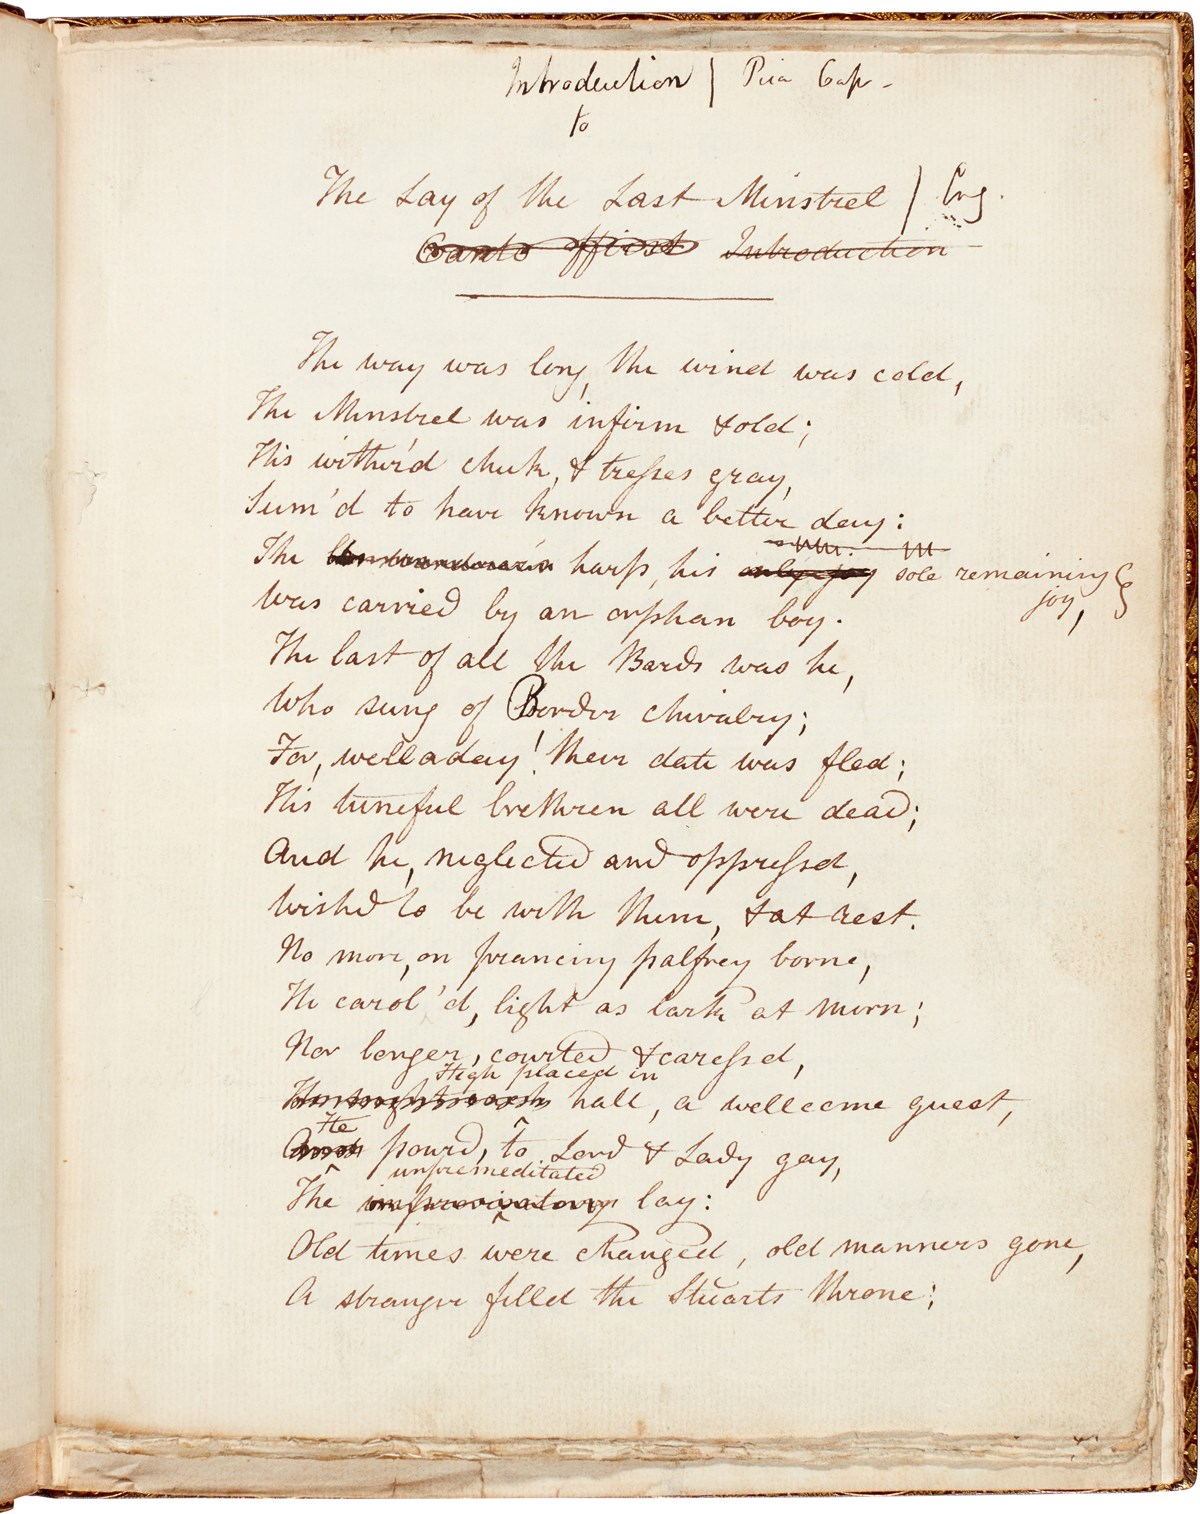 Walter Scott MS of The Lay of the Last Minstrel. Credit: Courtesy of Sotheby's